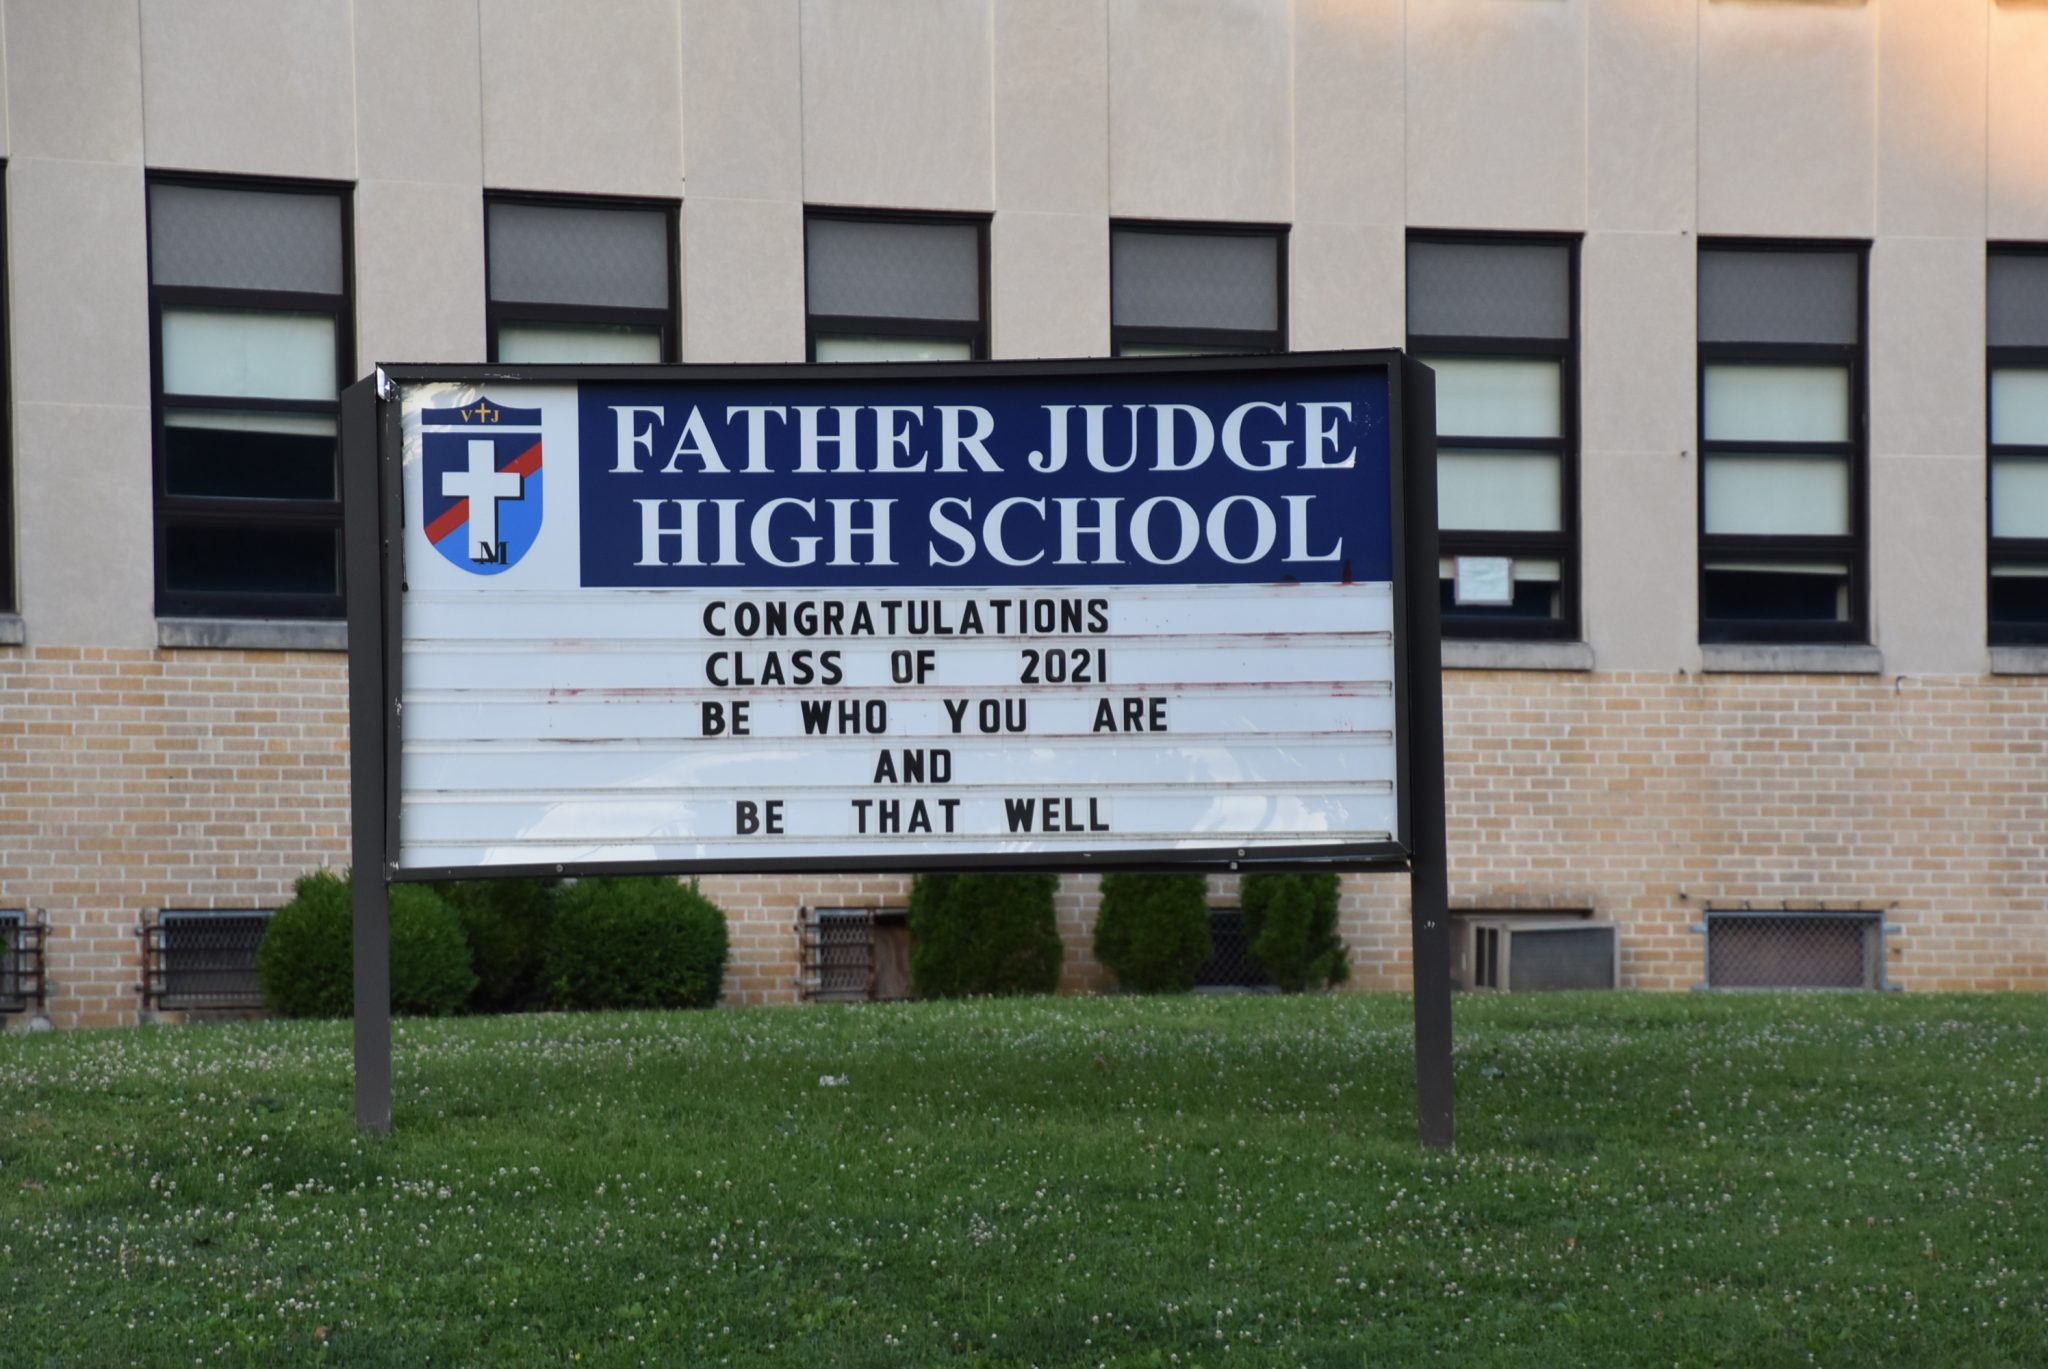 Congrats to the Father Judge Class of 2021 Northeast Times